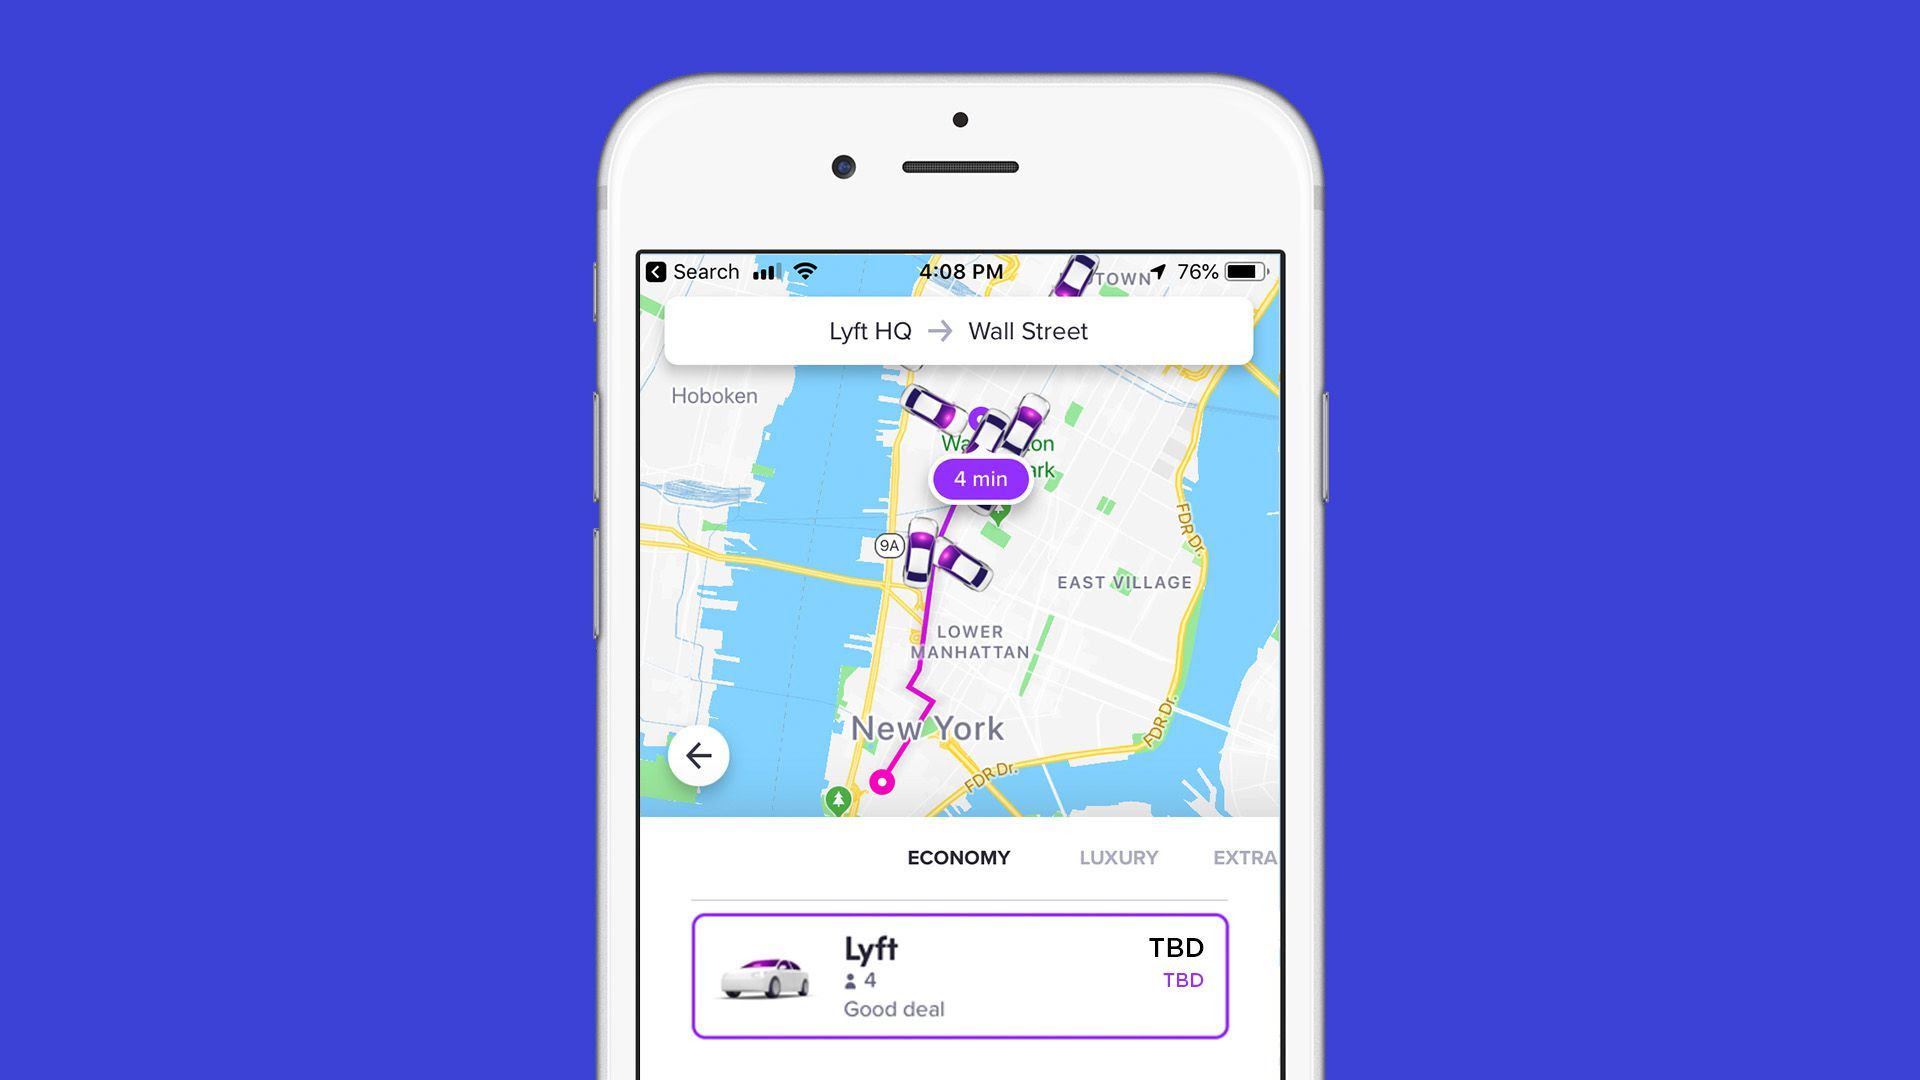 Illustration of Lyft app with ride request for "Lyft HQ to Wall Street."